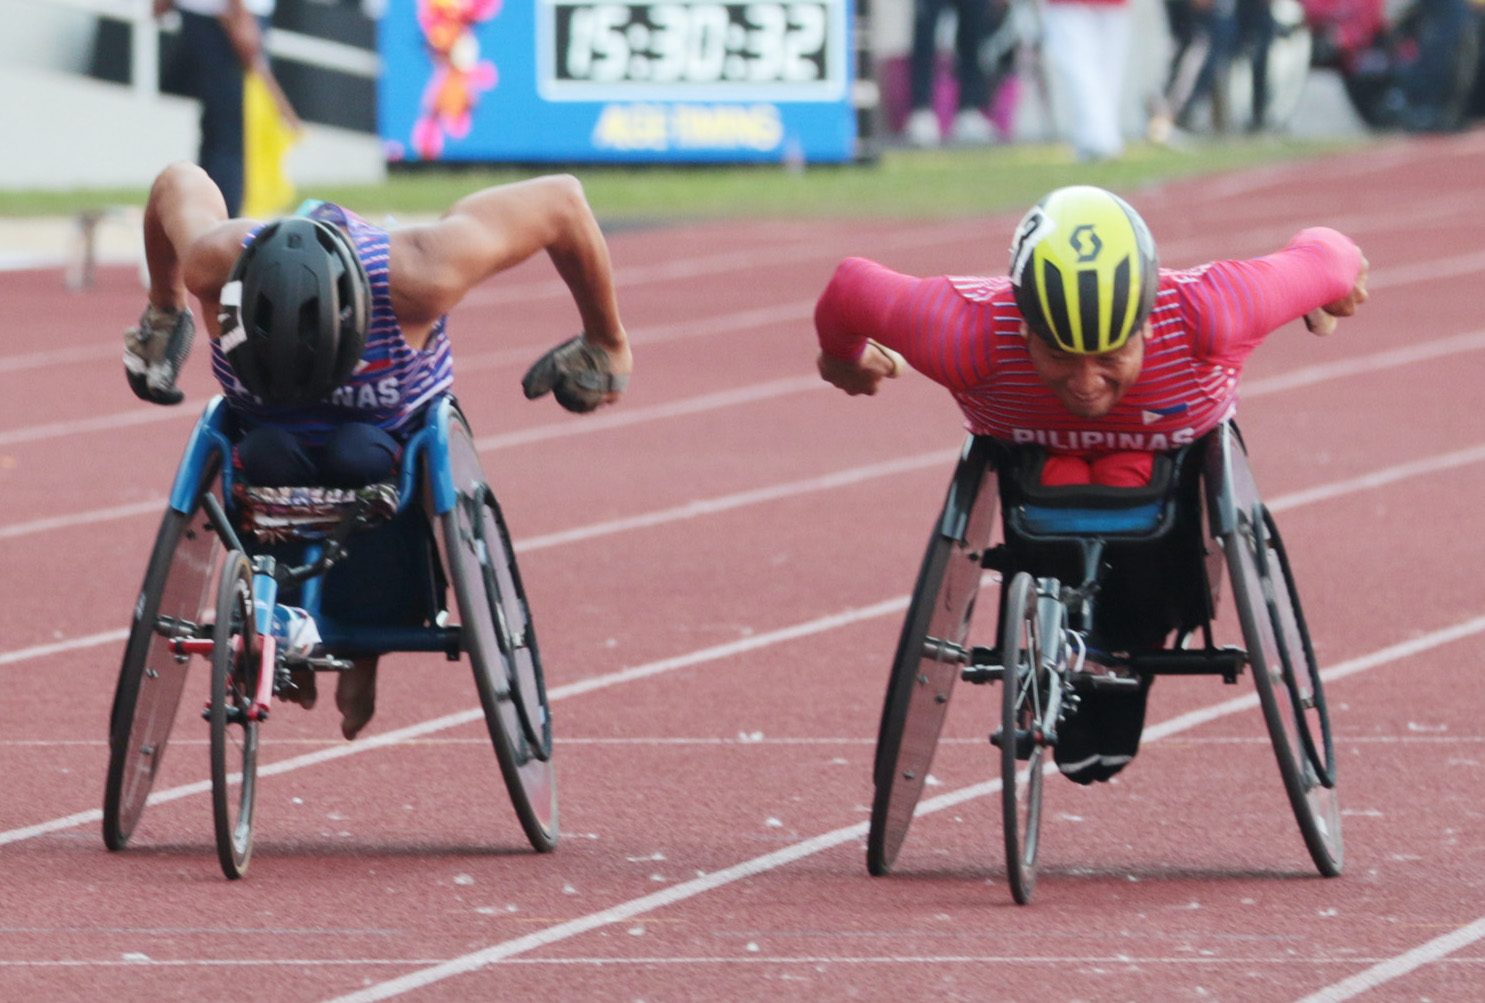 PH adds 6 golds to ASEAN Para Games tally off standout athletics, swimming outings